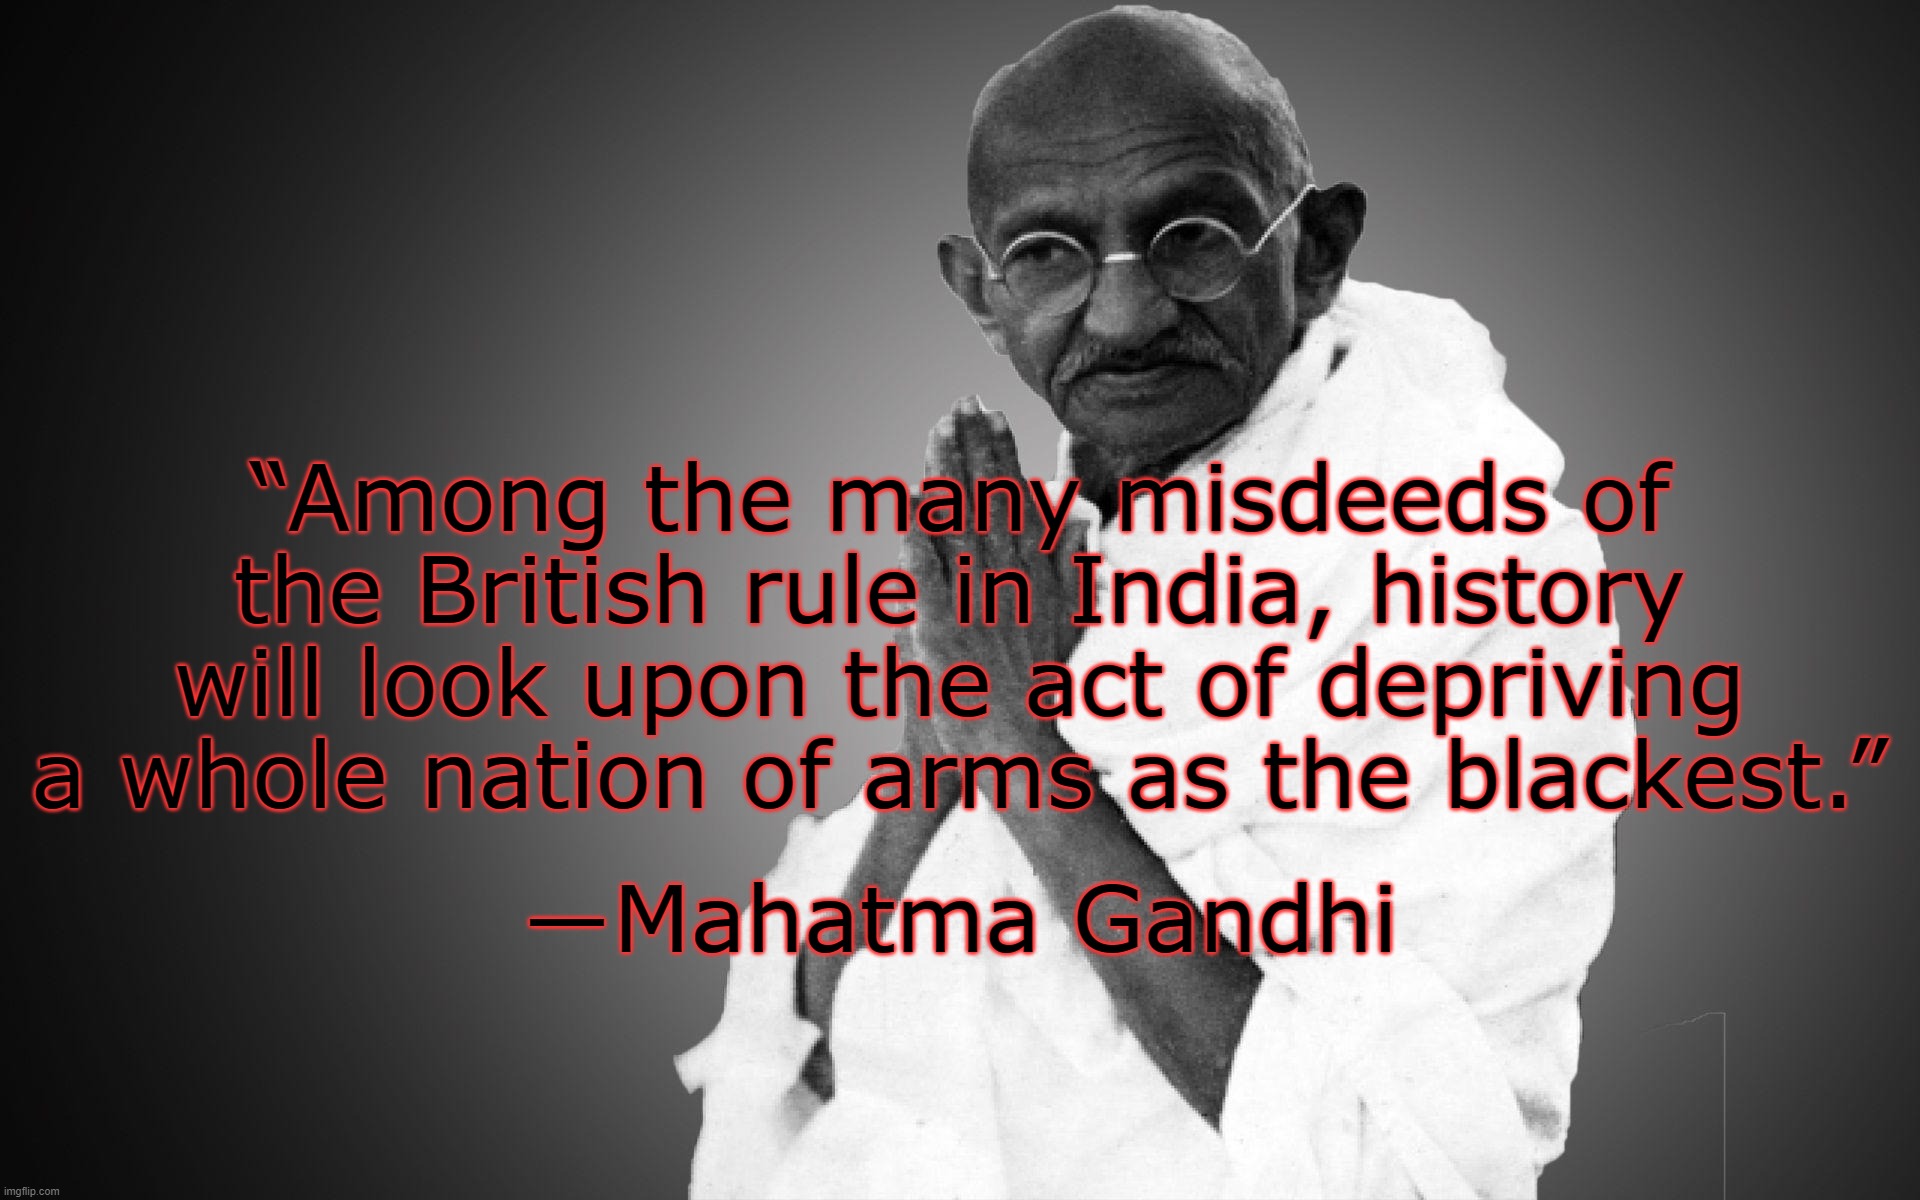 Ghandhi on guns . . . | ―Mahatma Gandhi; “Among the many misdeeds of the British rule in India, history will look upon the act of depriving a whole nation of arms as the blackest.” | image tagged in guns,2nd amendment,quotes,mahatma gandhi | made w/ Imgflip meme maker